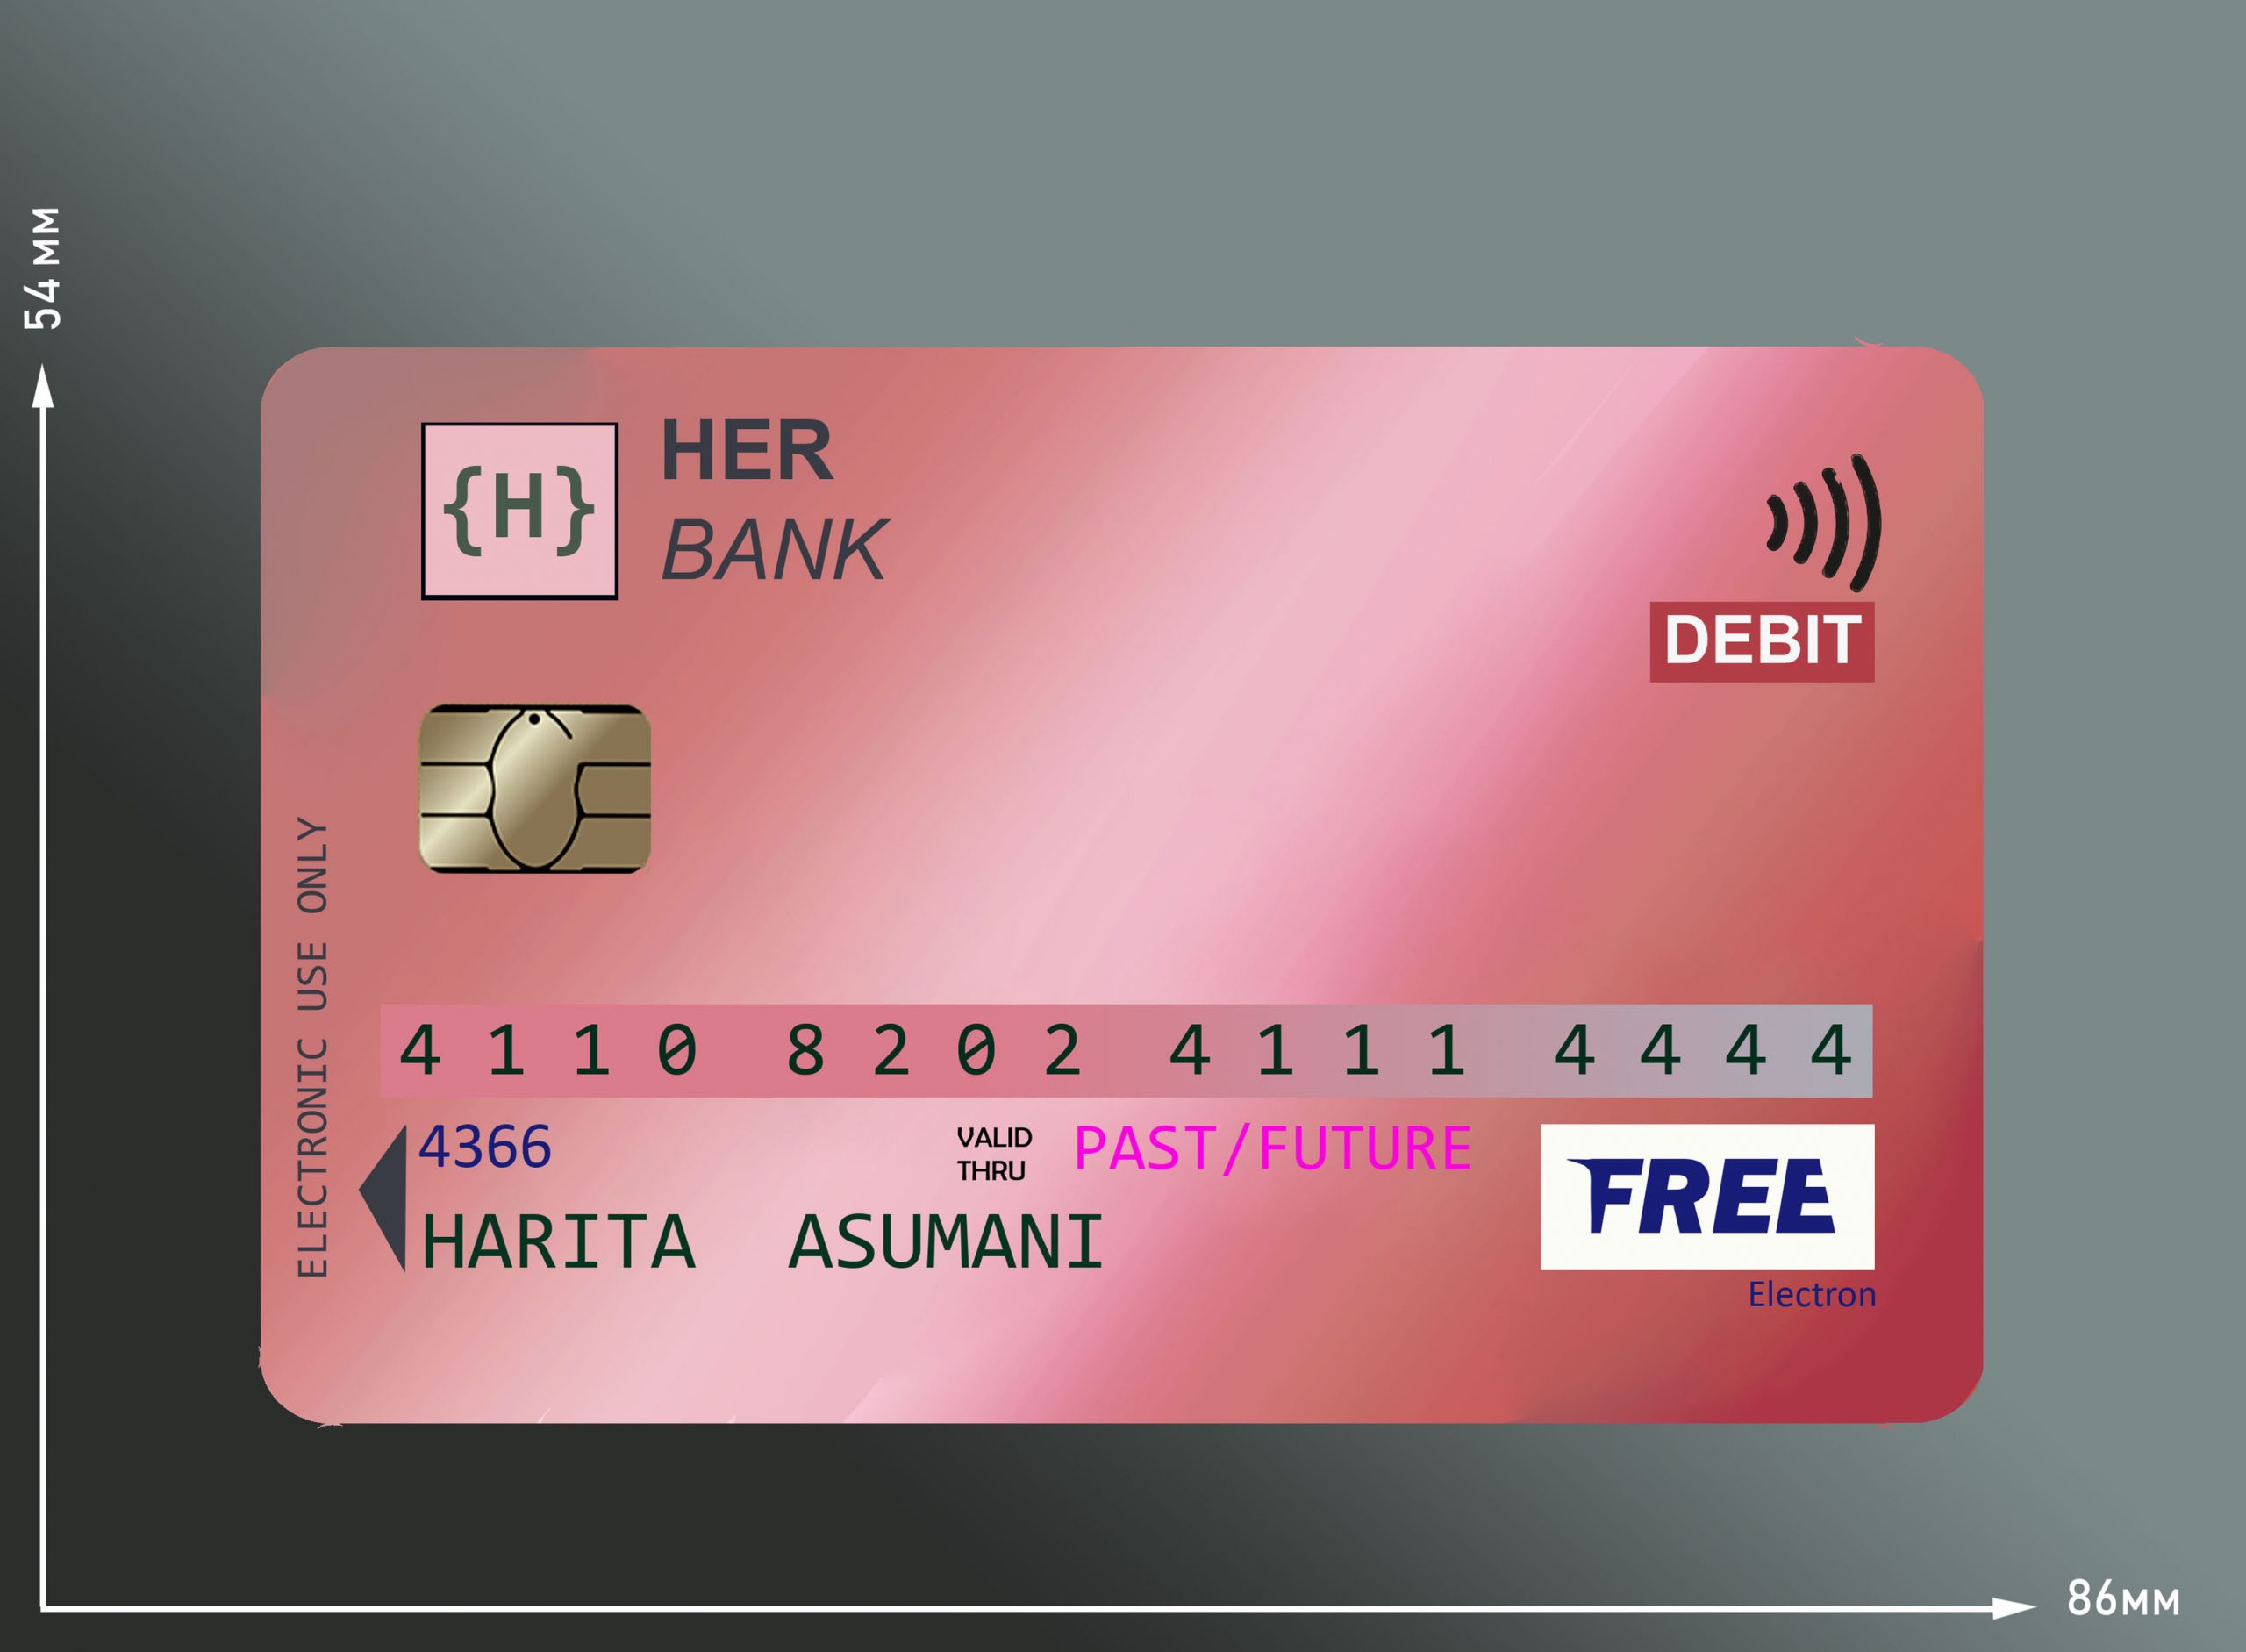 Her card her bank